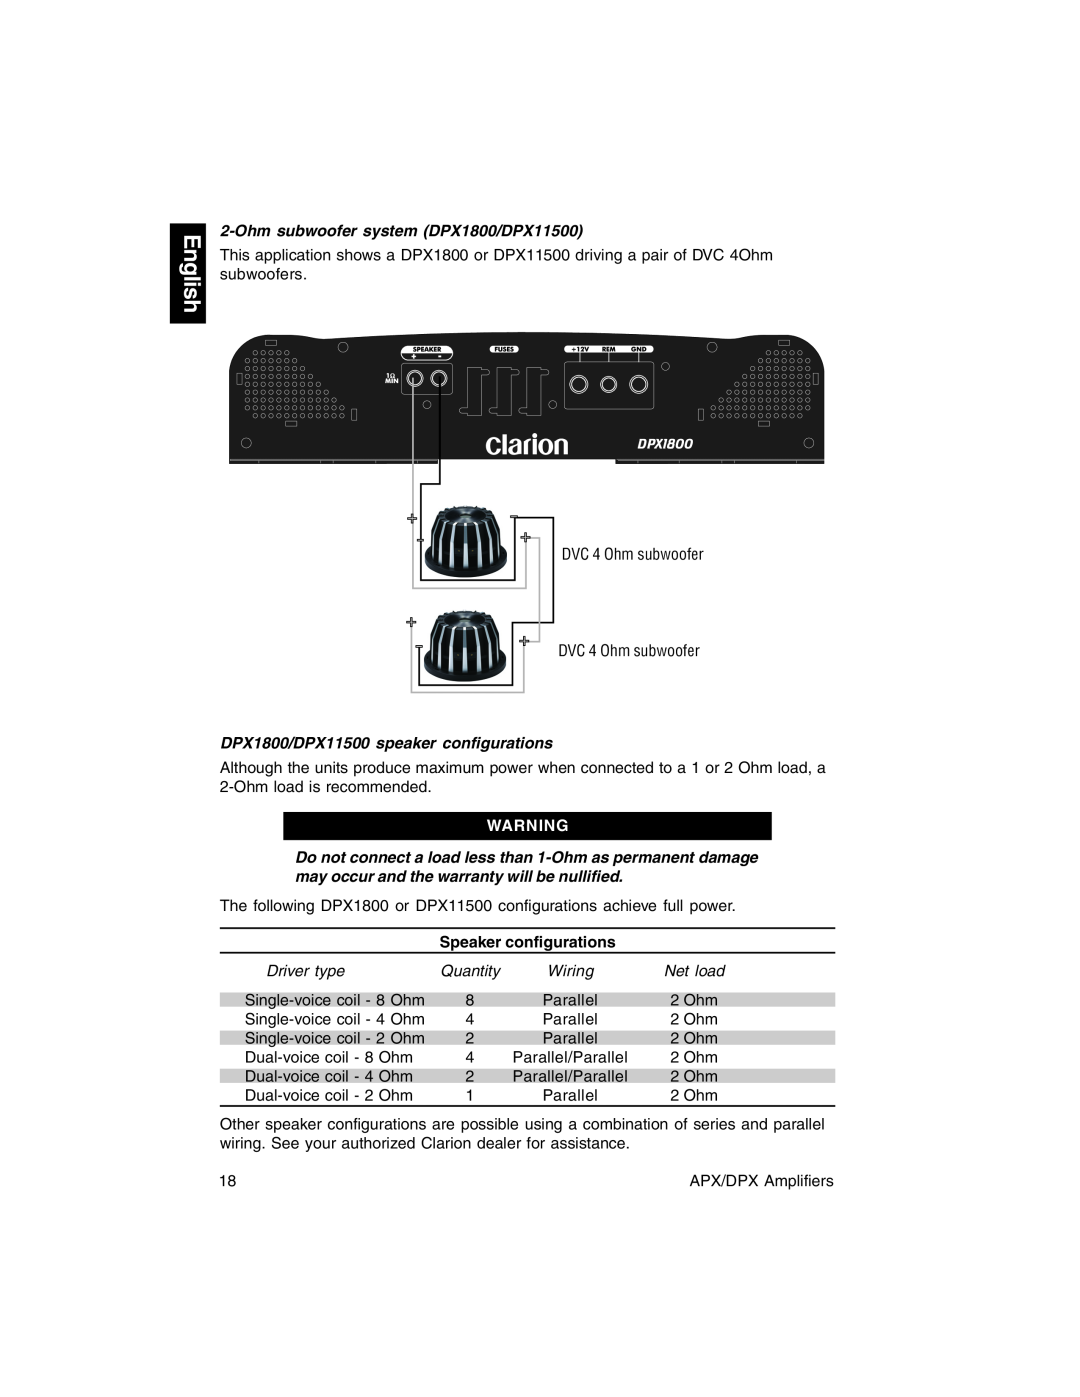 Clarion DPX2250, APX2180, APX4360 Ohmsubwoofer system DPX1800/DPX11500, DPX1800/DPX11500 speaker configurations, English 